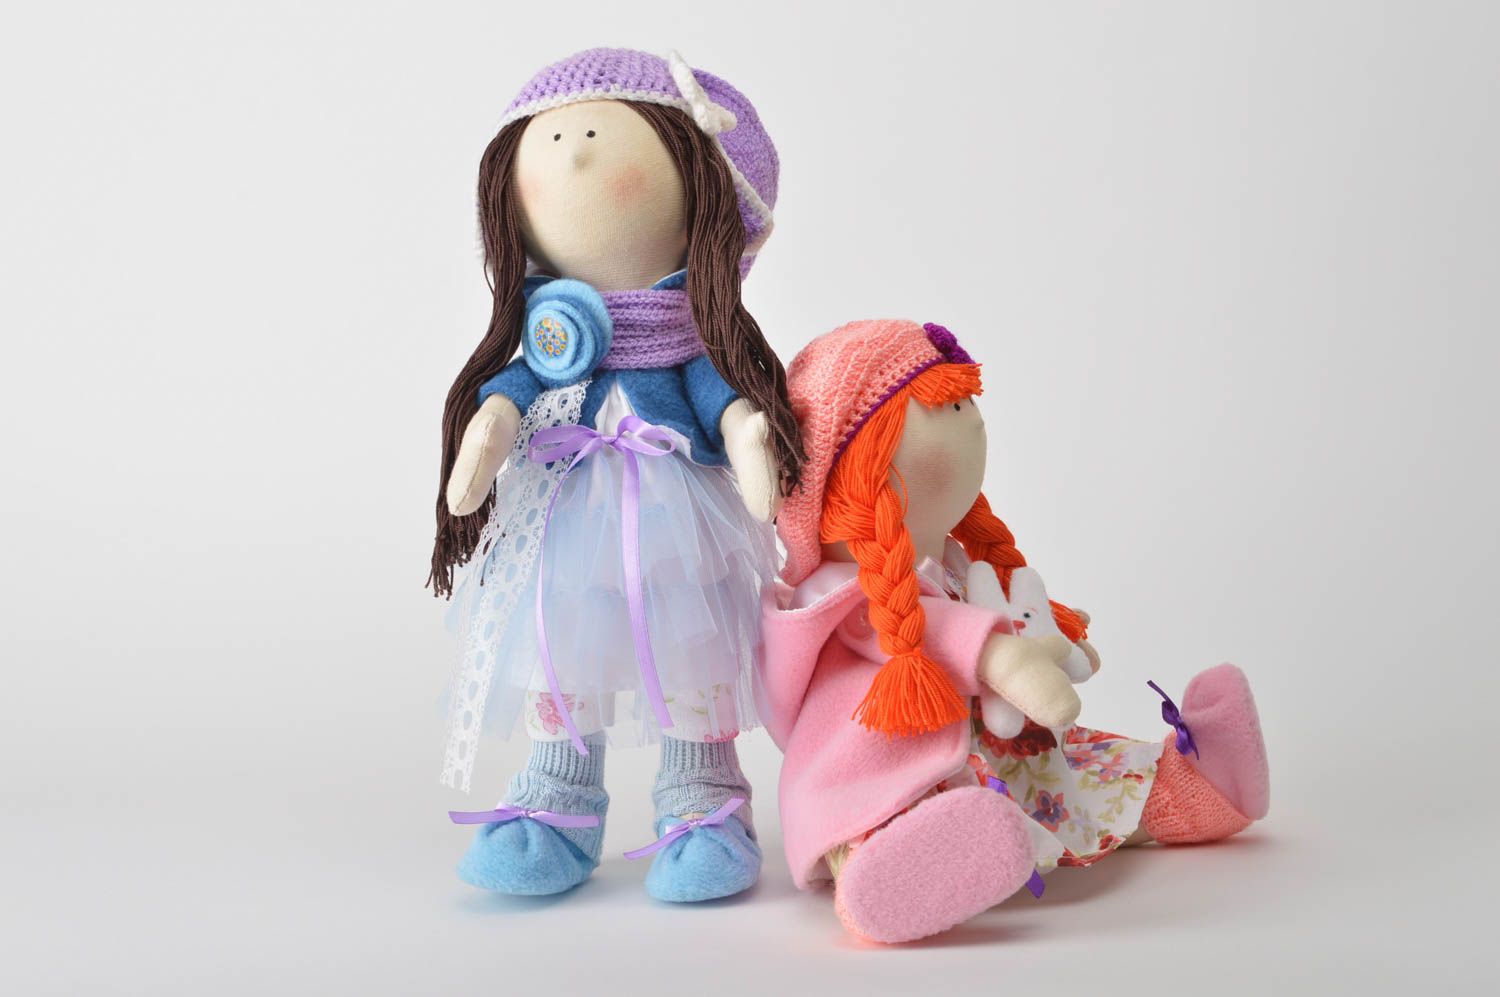 Beautiful handmade rag doll stuffed soft toy 2 pieces childrens toys gift ideas photo 2